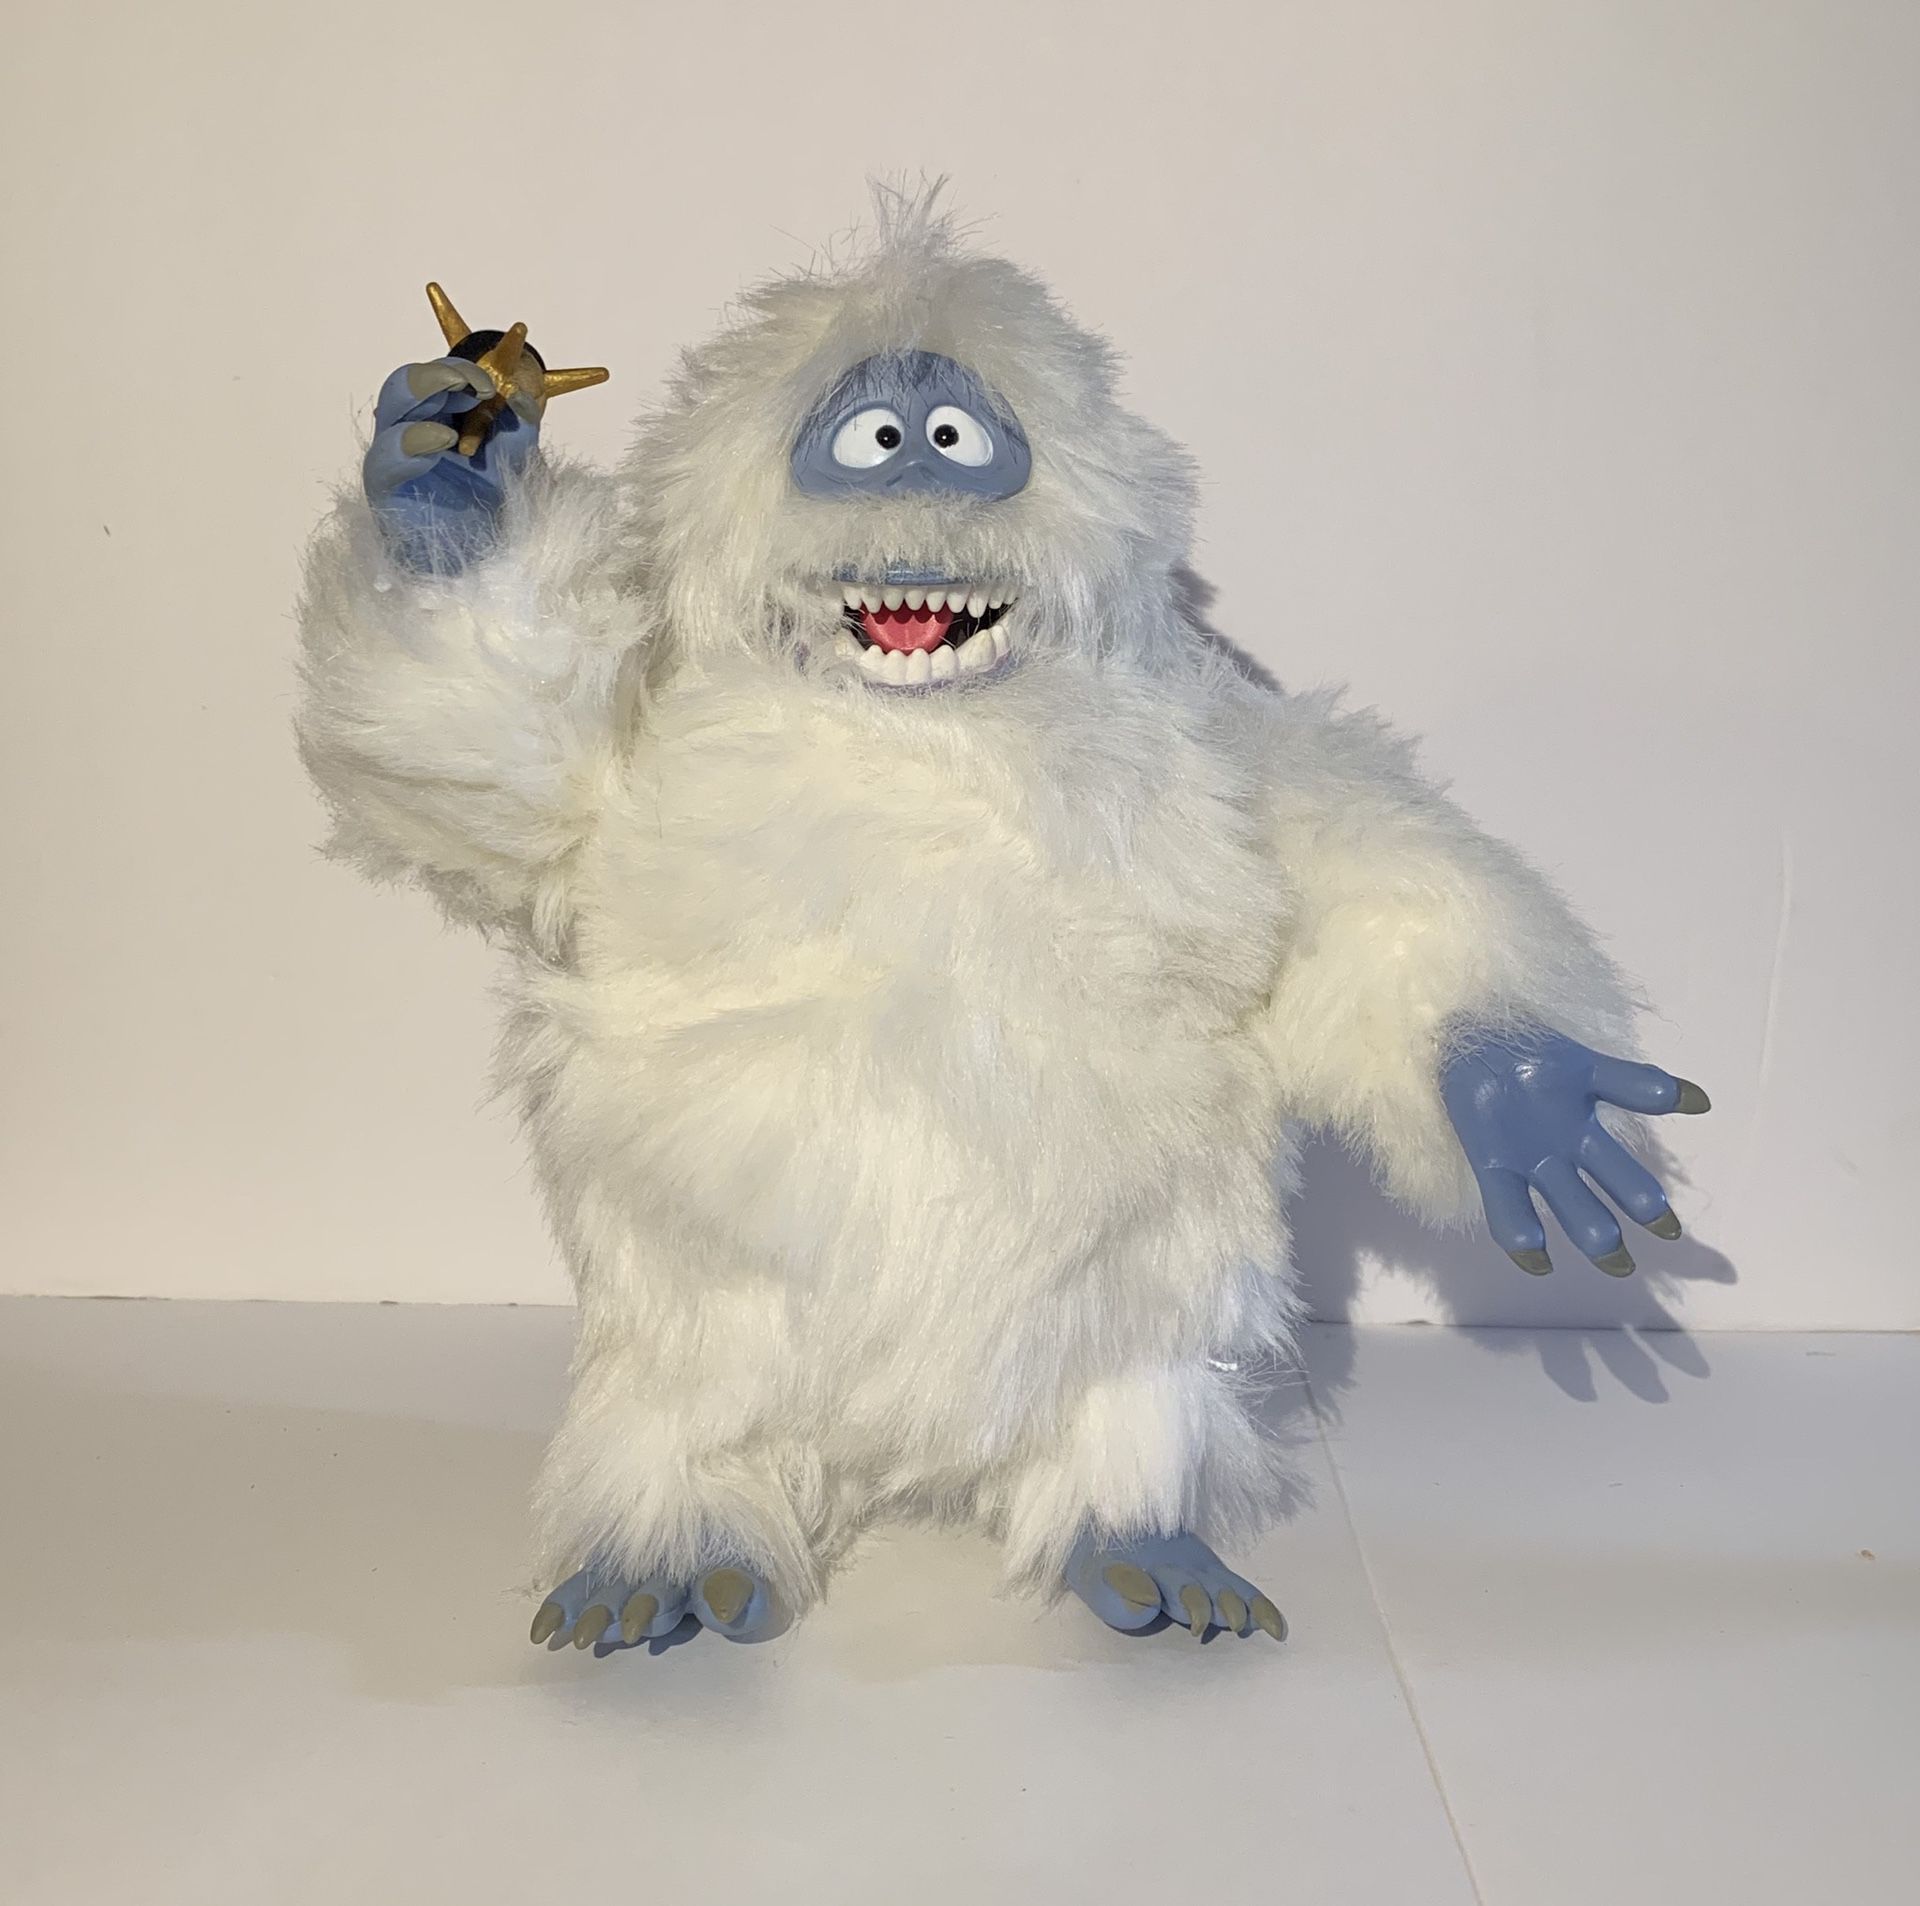 The Island of Misfit Toys - Abominable Snow Monster